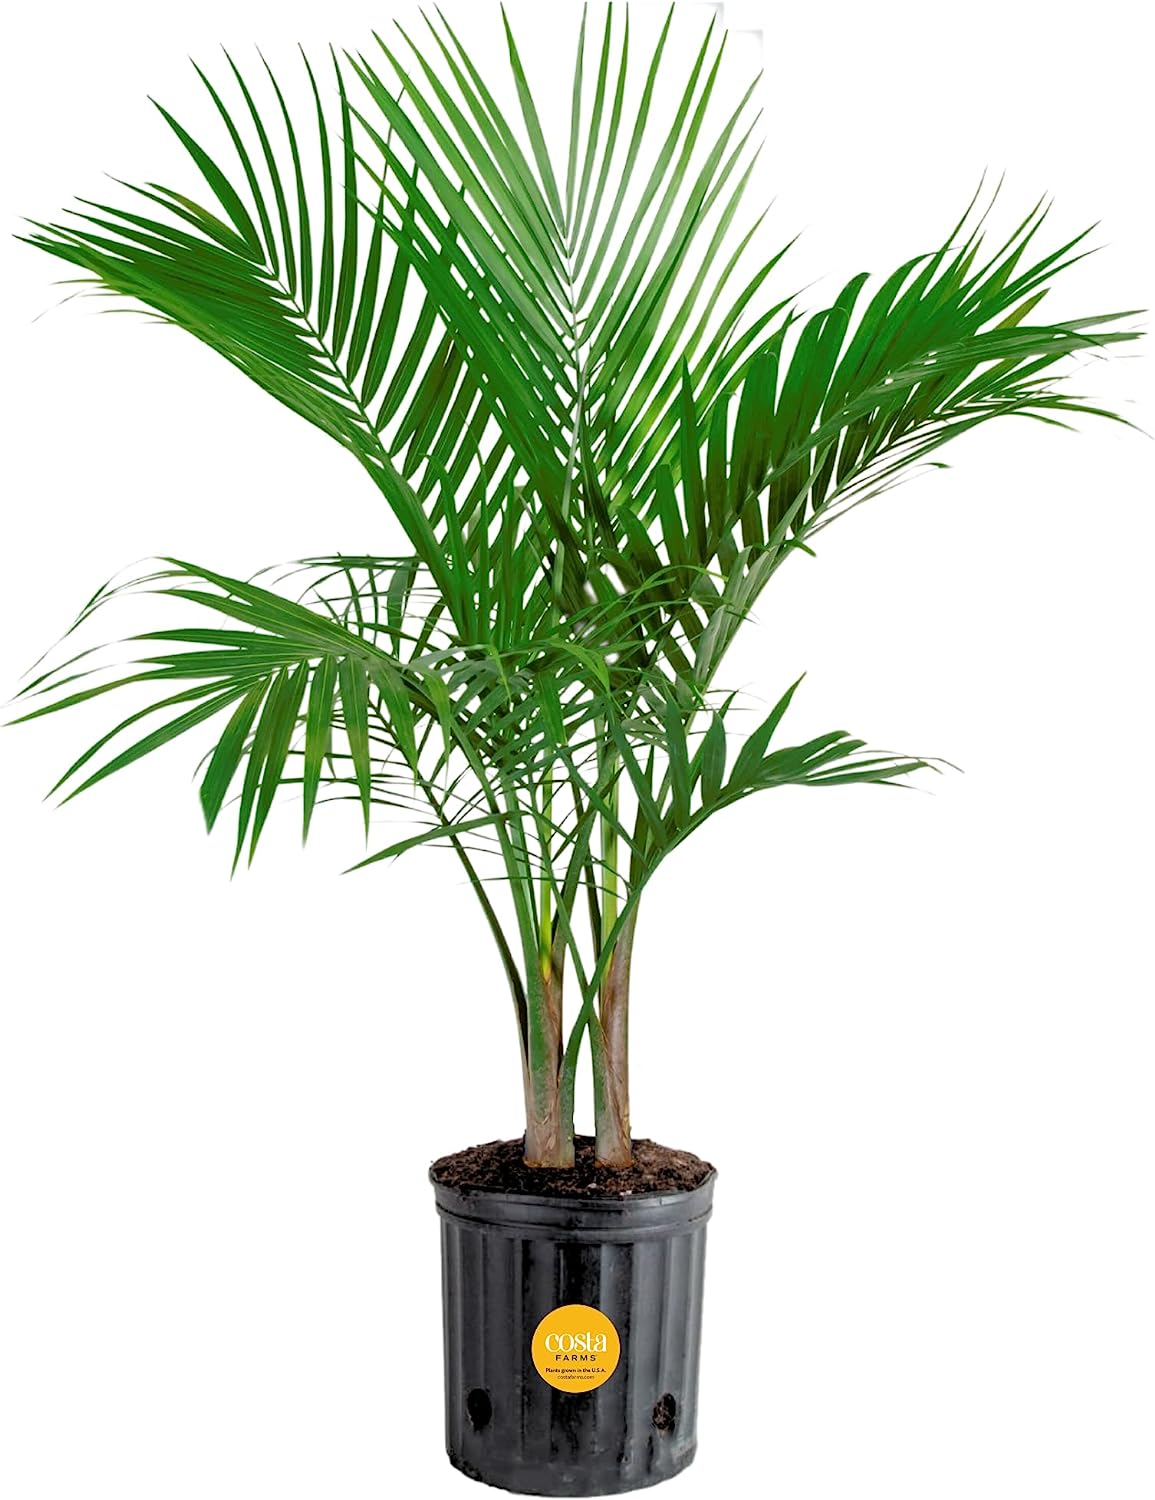 3-4 Ft Costa Farms Majesty Palm Live Plant $27.32 at Amazon